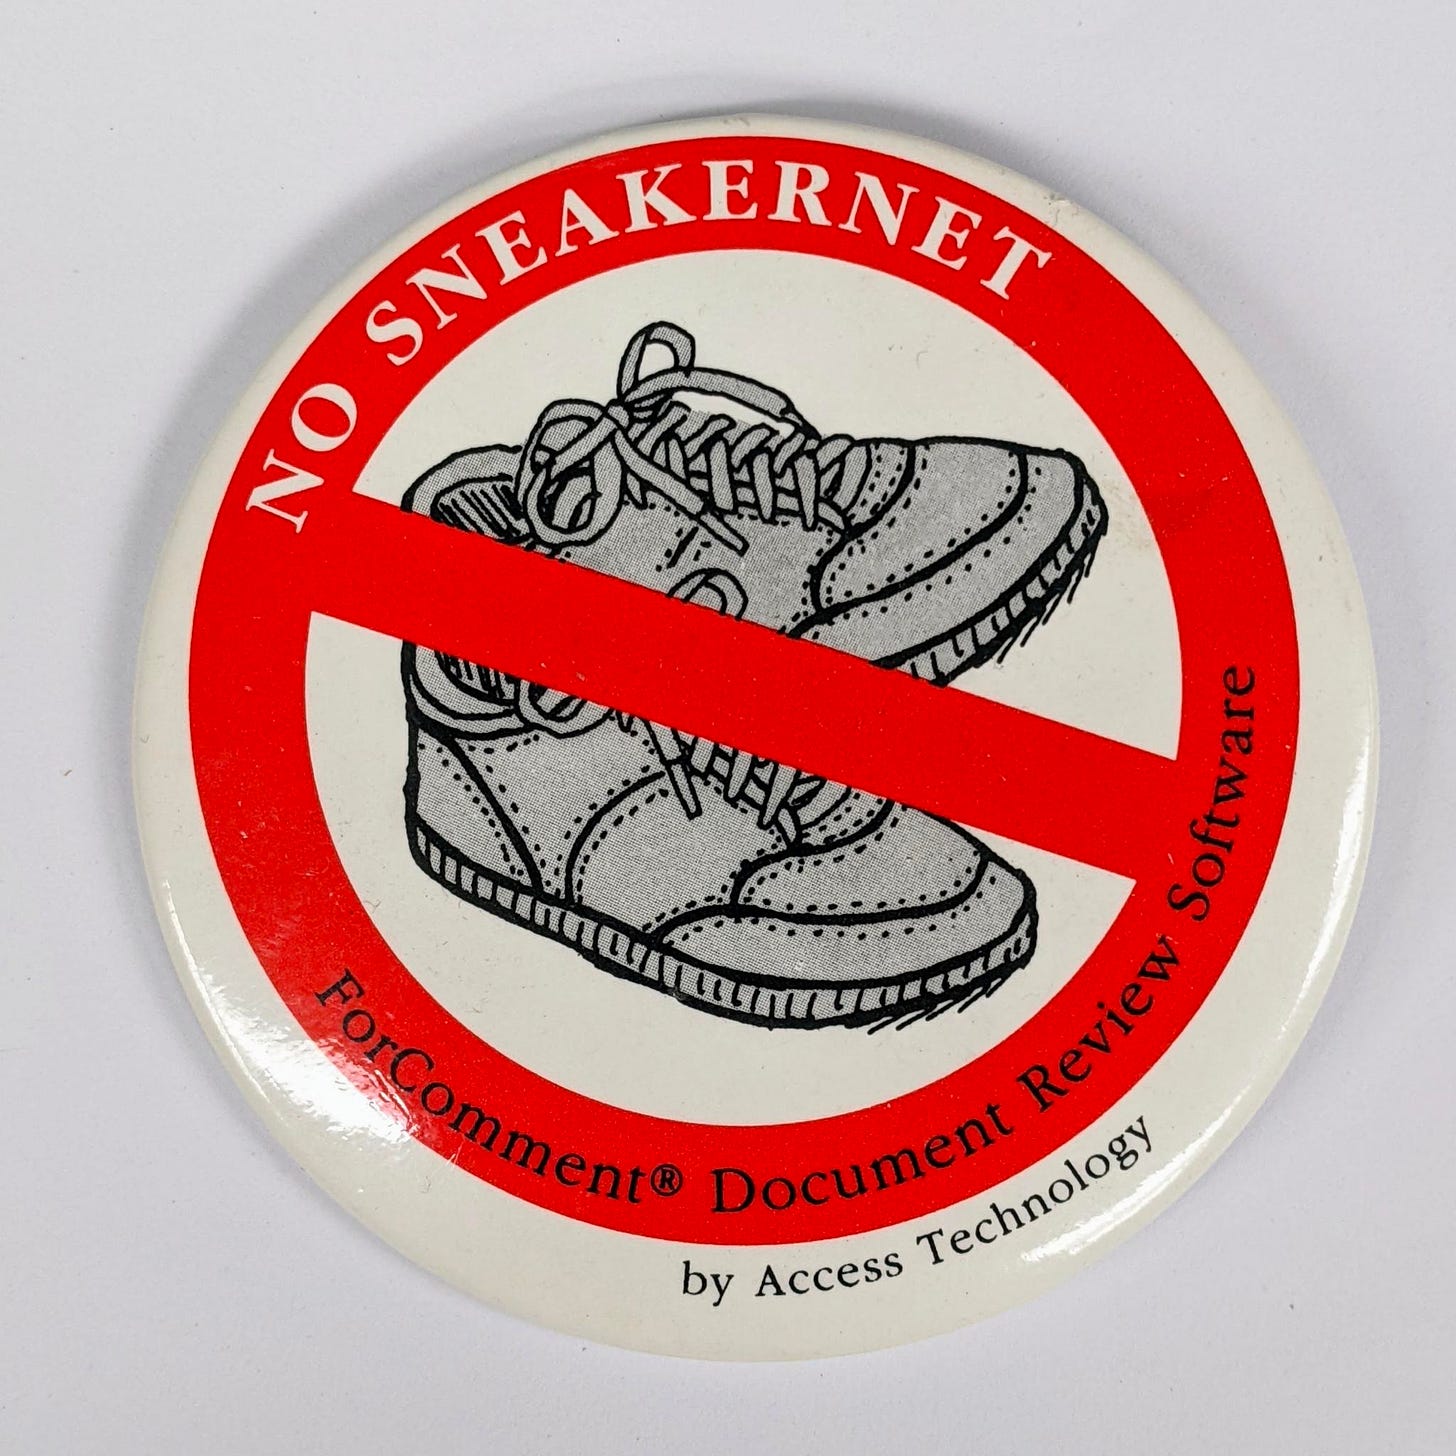 a white button with a red circle & strikethrough over a grayscale drawing of sneakers, with white text saying "no sneakernet" and black text saying "ForComment Document Review Software"